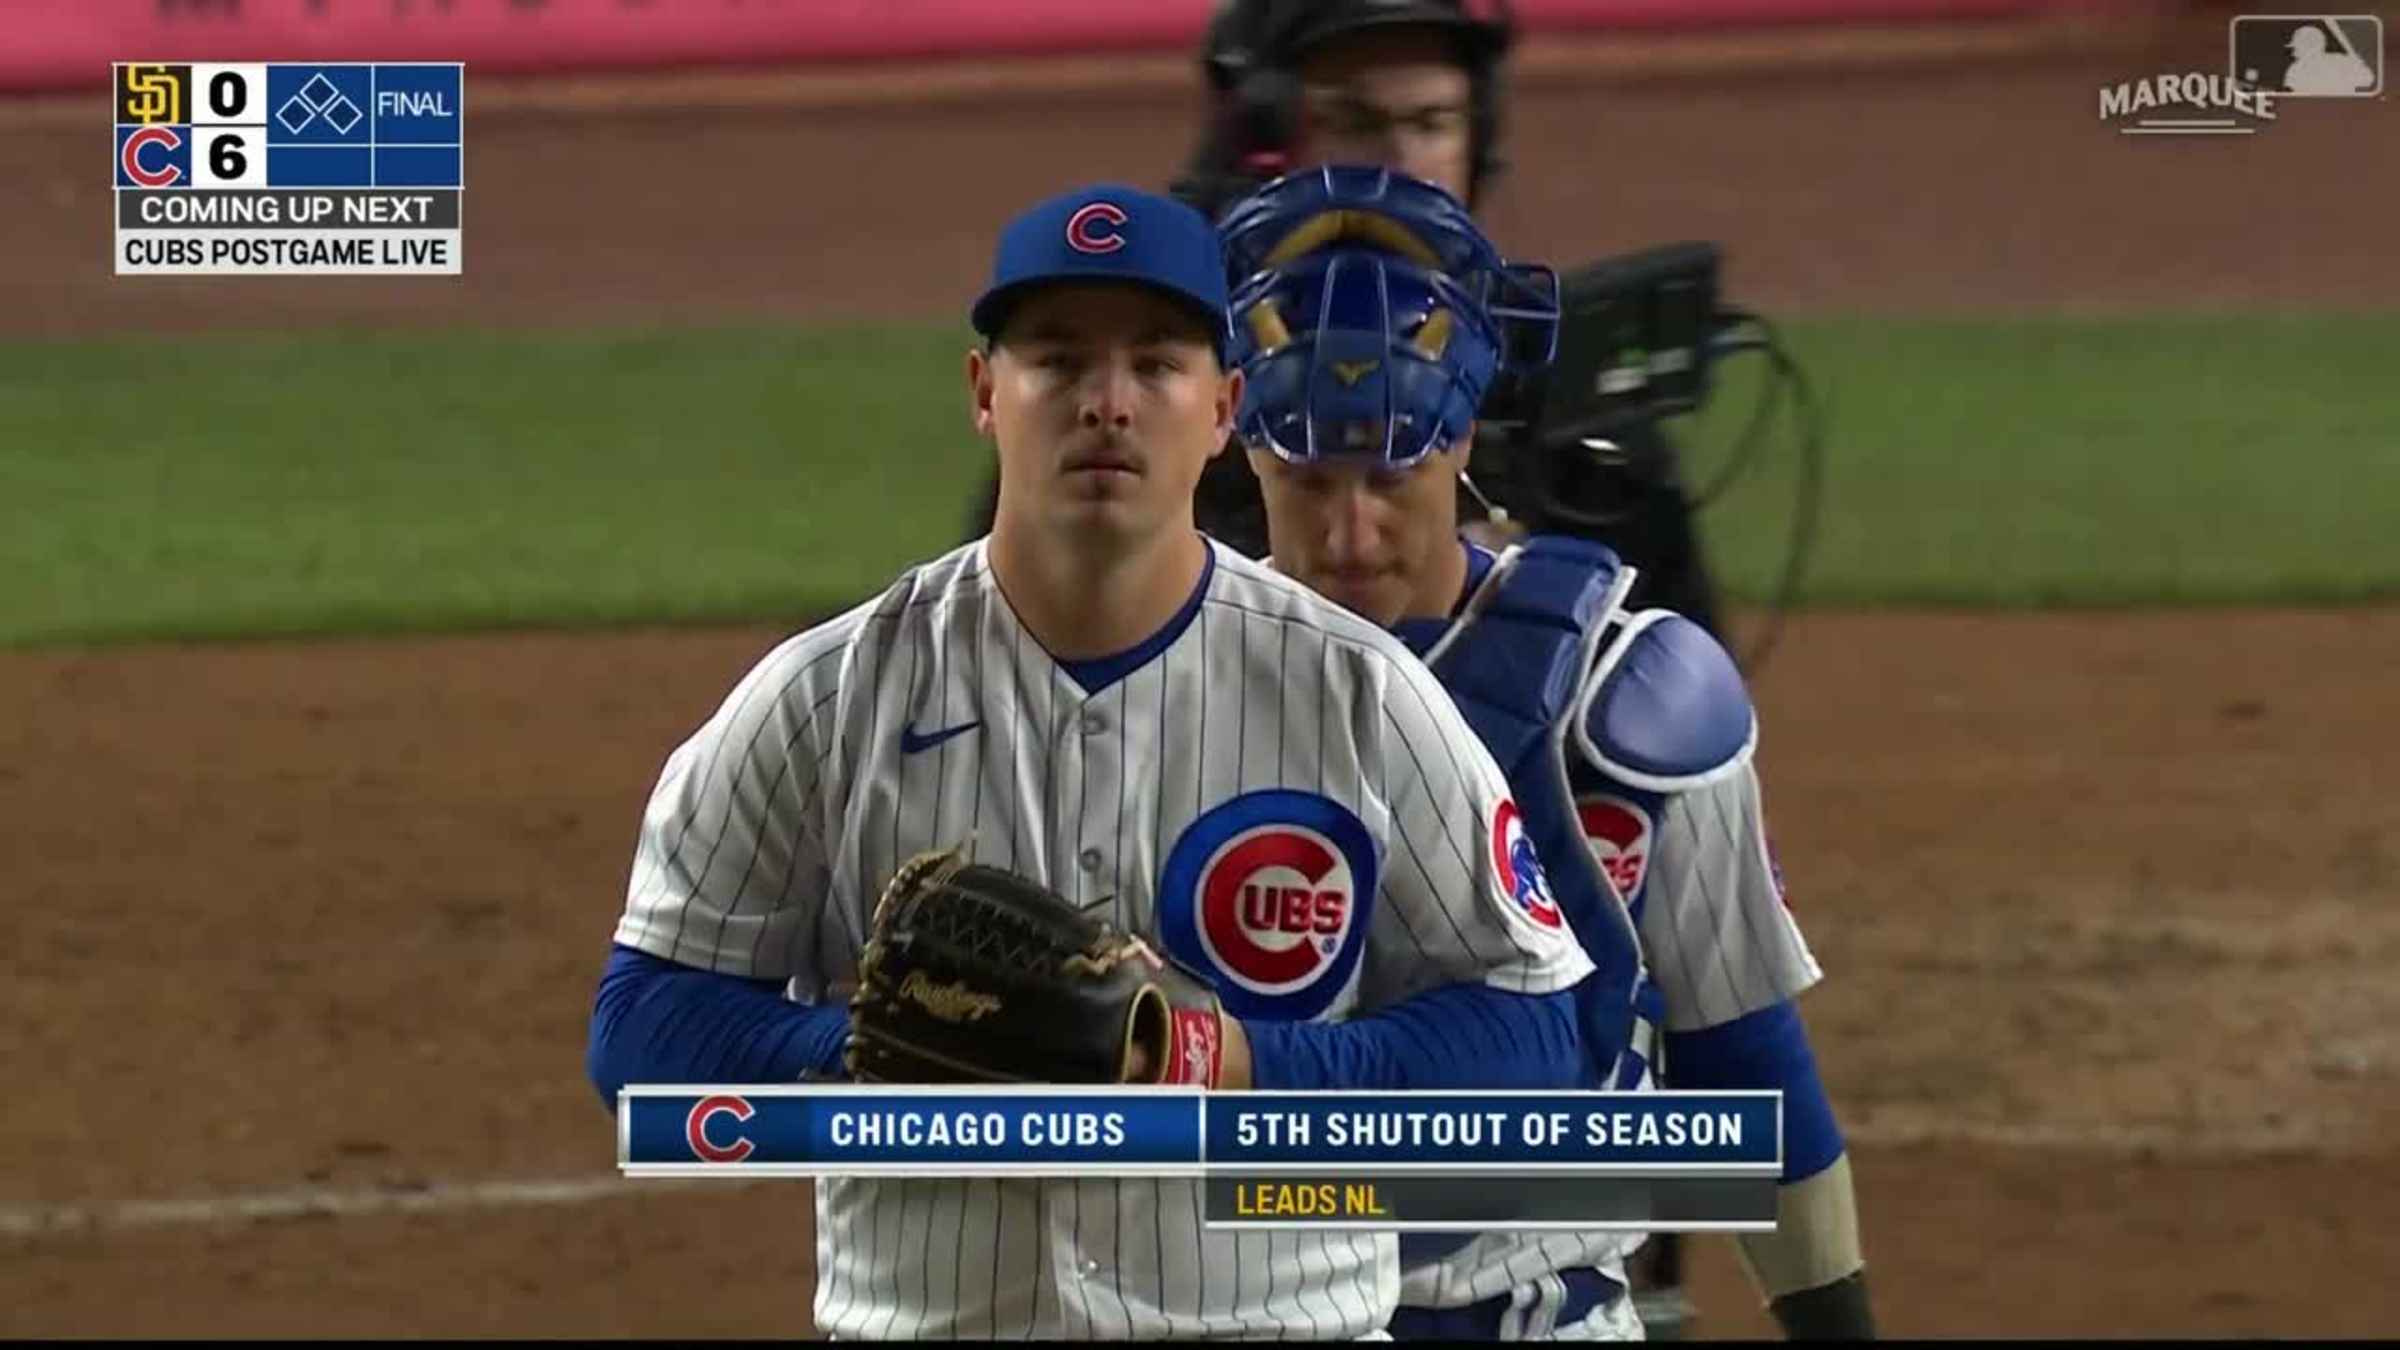 MLB Gameday Padres 0, Cubs 6 Final Score (04/25/2023)